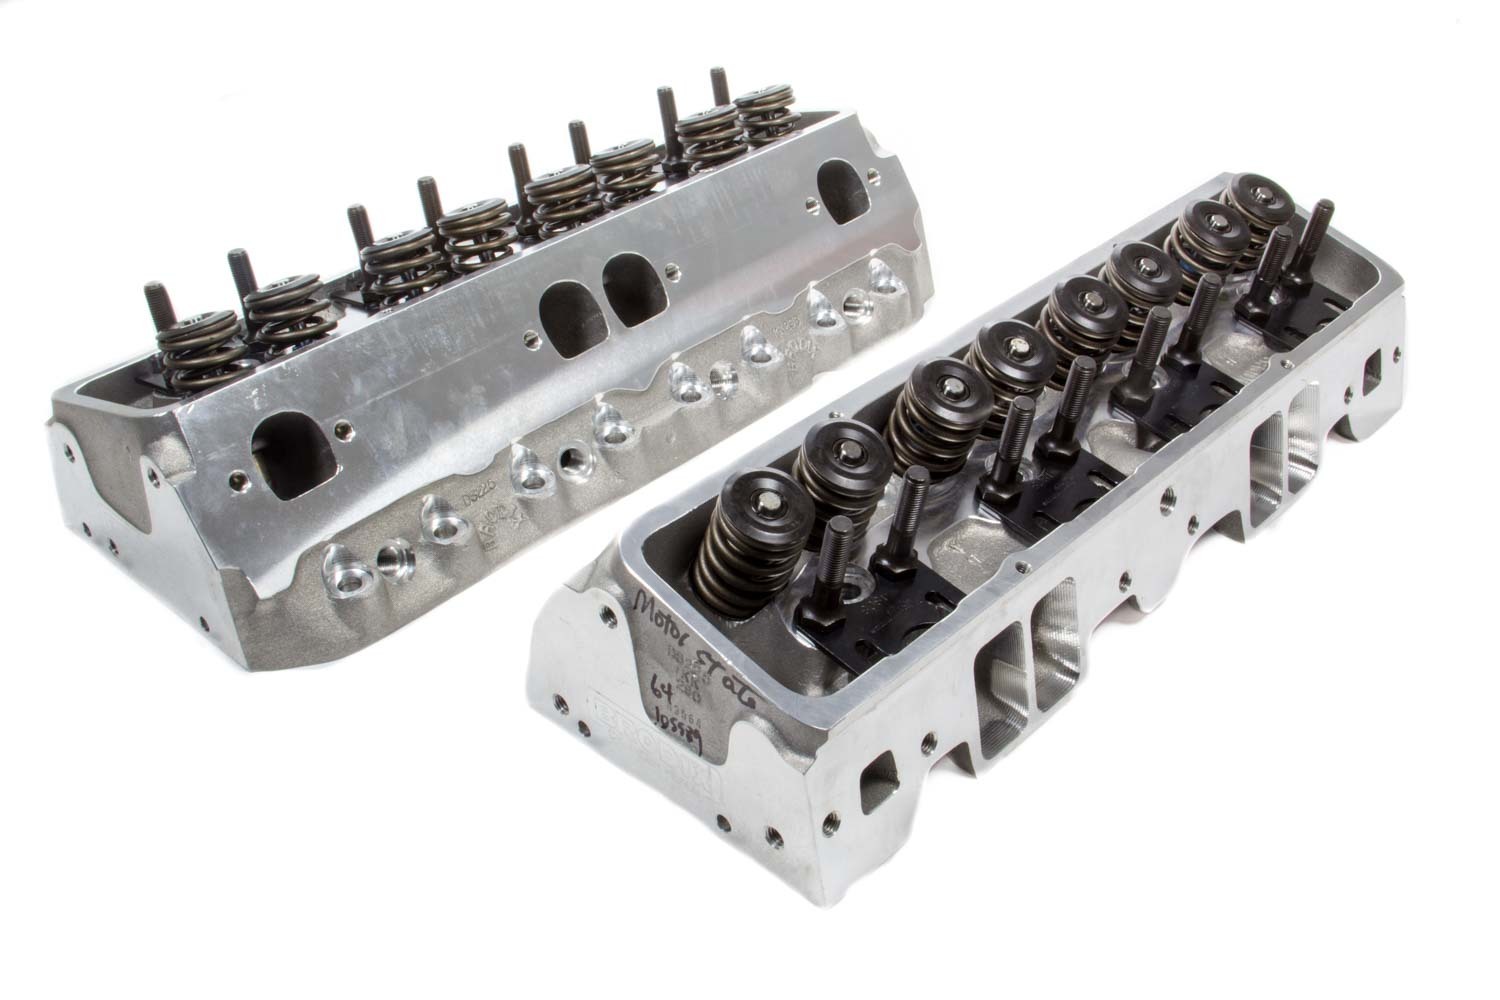 Brodix 1321003 Cylinder Head, DS 225, Assembled, 2.080 / 1.600 in Valves, 225 cc Intake, 64 cc Chamber, 1.550 in Springs, Angle Plug, Aluminum, Small Block Chevy, Pair